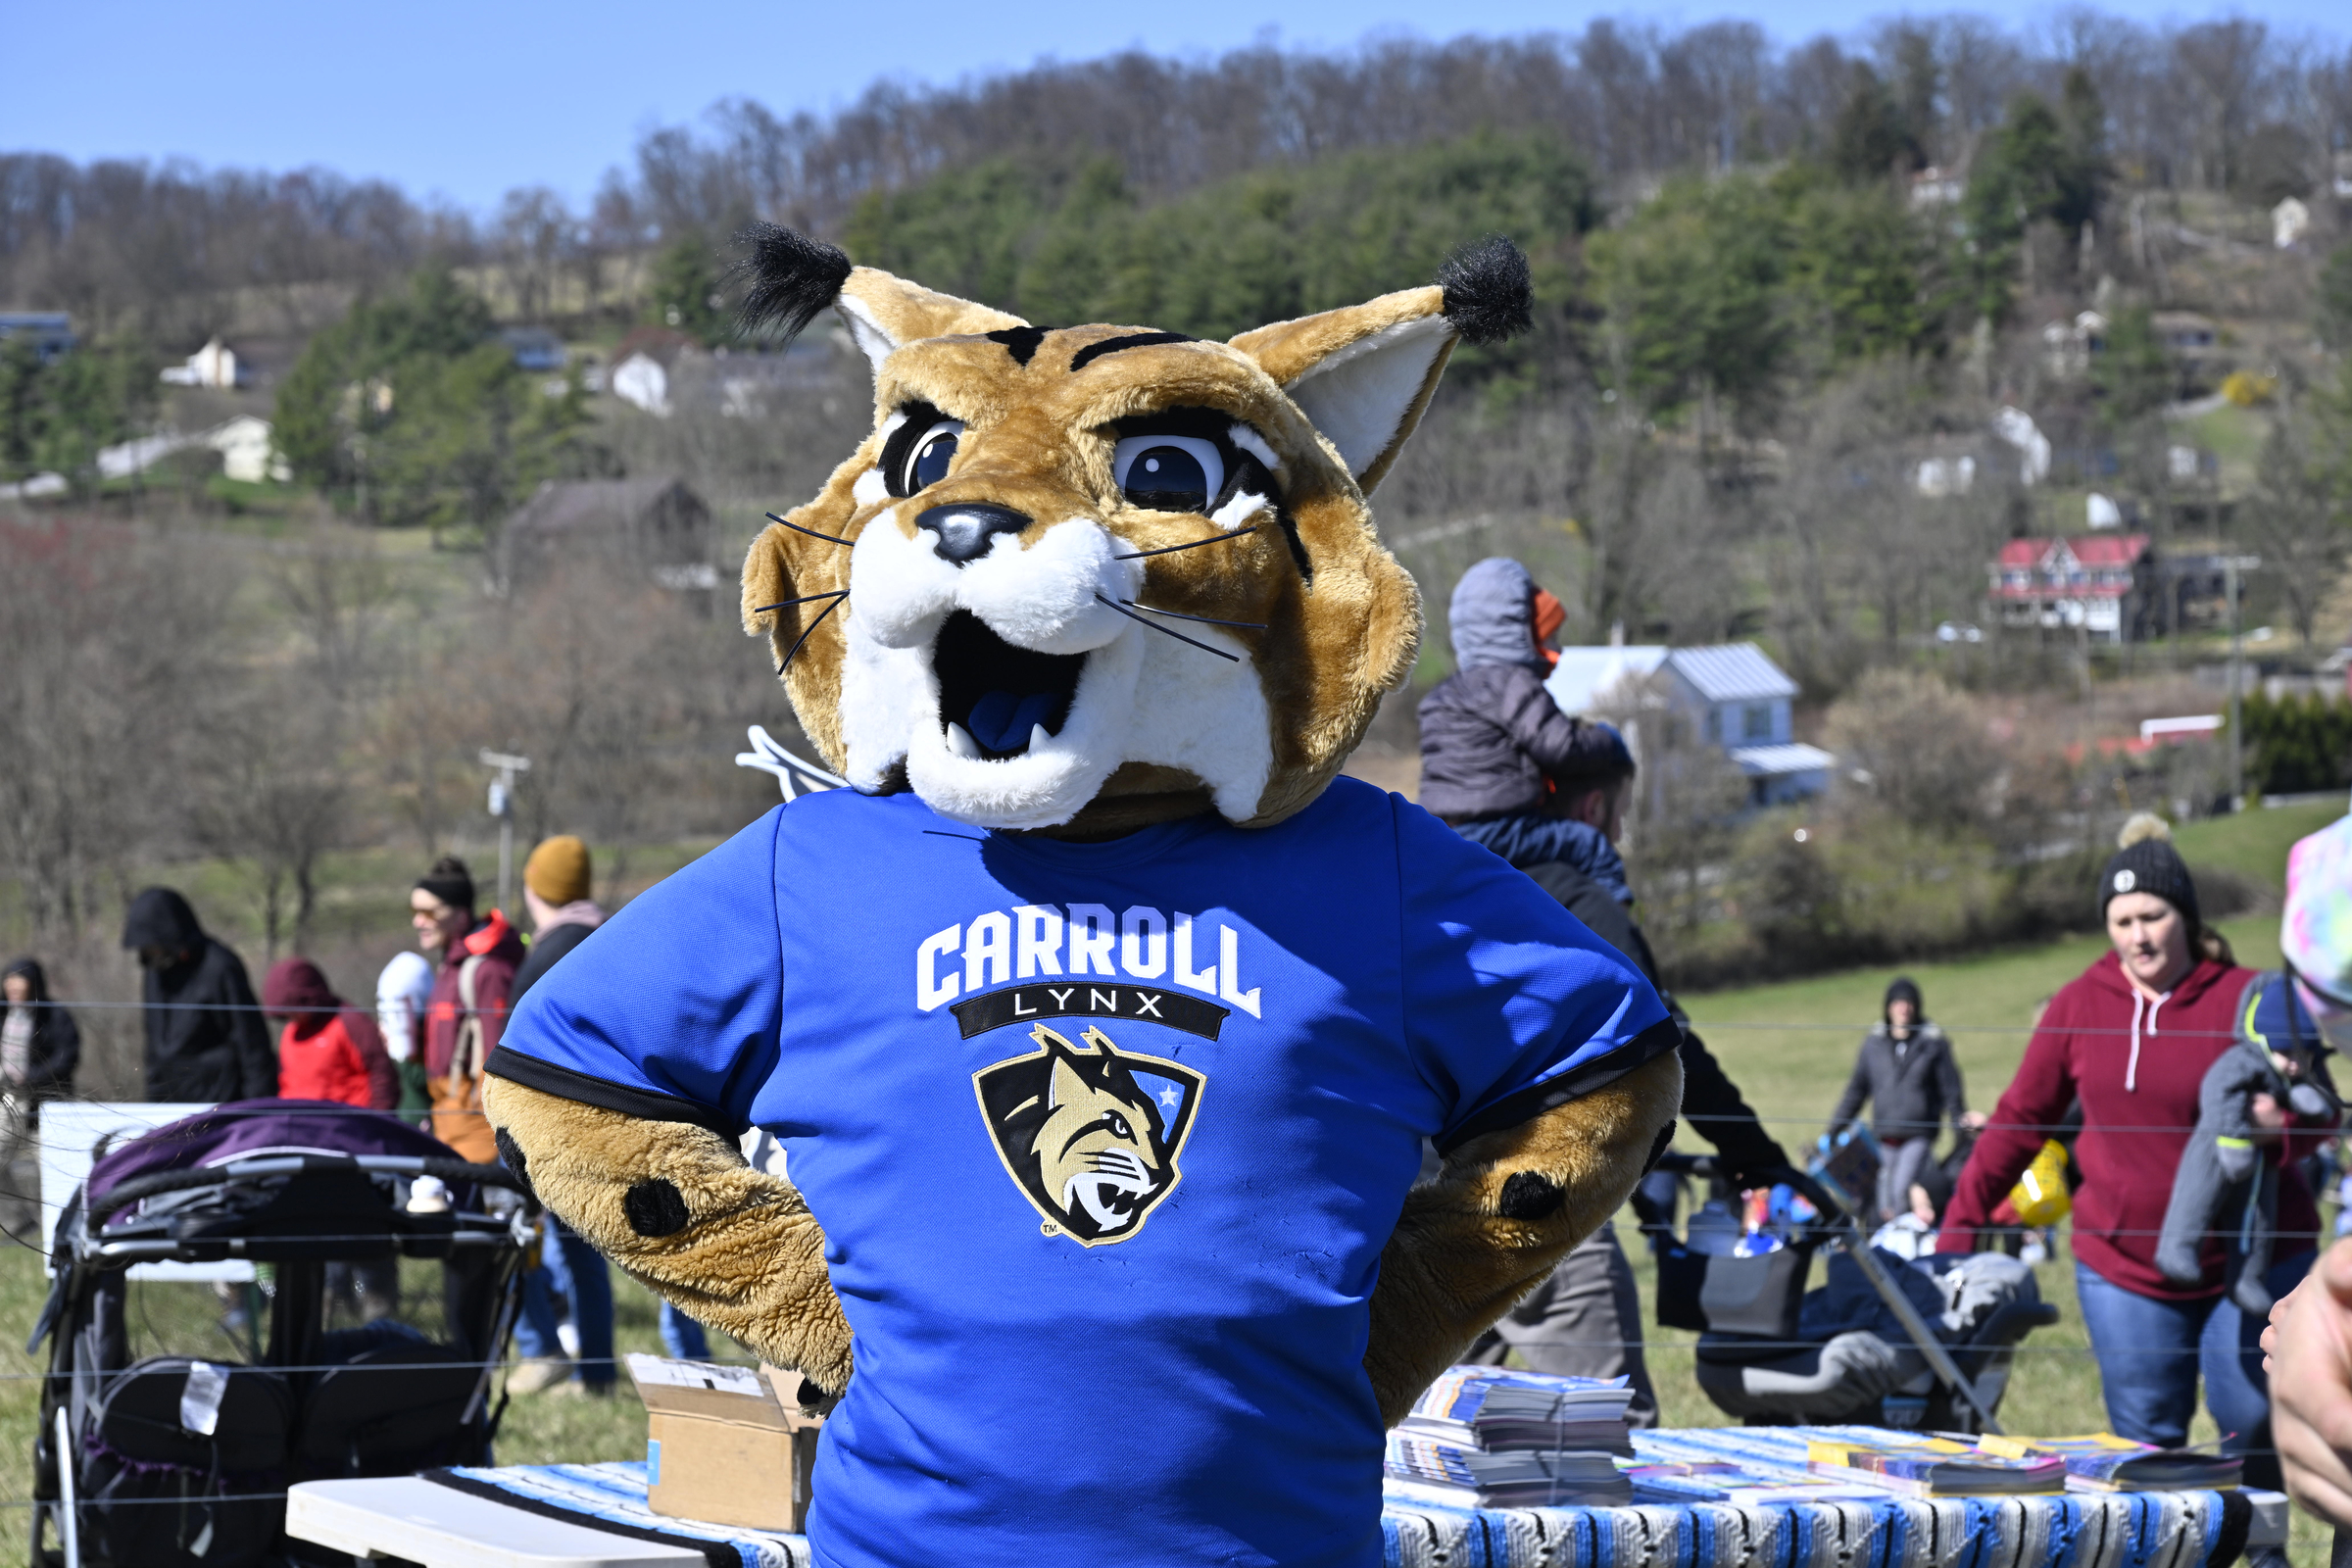 The Carroll Lynx made an appearance at the Coppermine Eggstravaganza at Cascade Park in Hampstead. (Thomas Walker/Freelance)